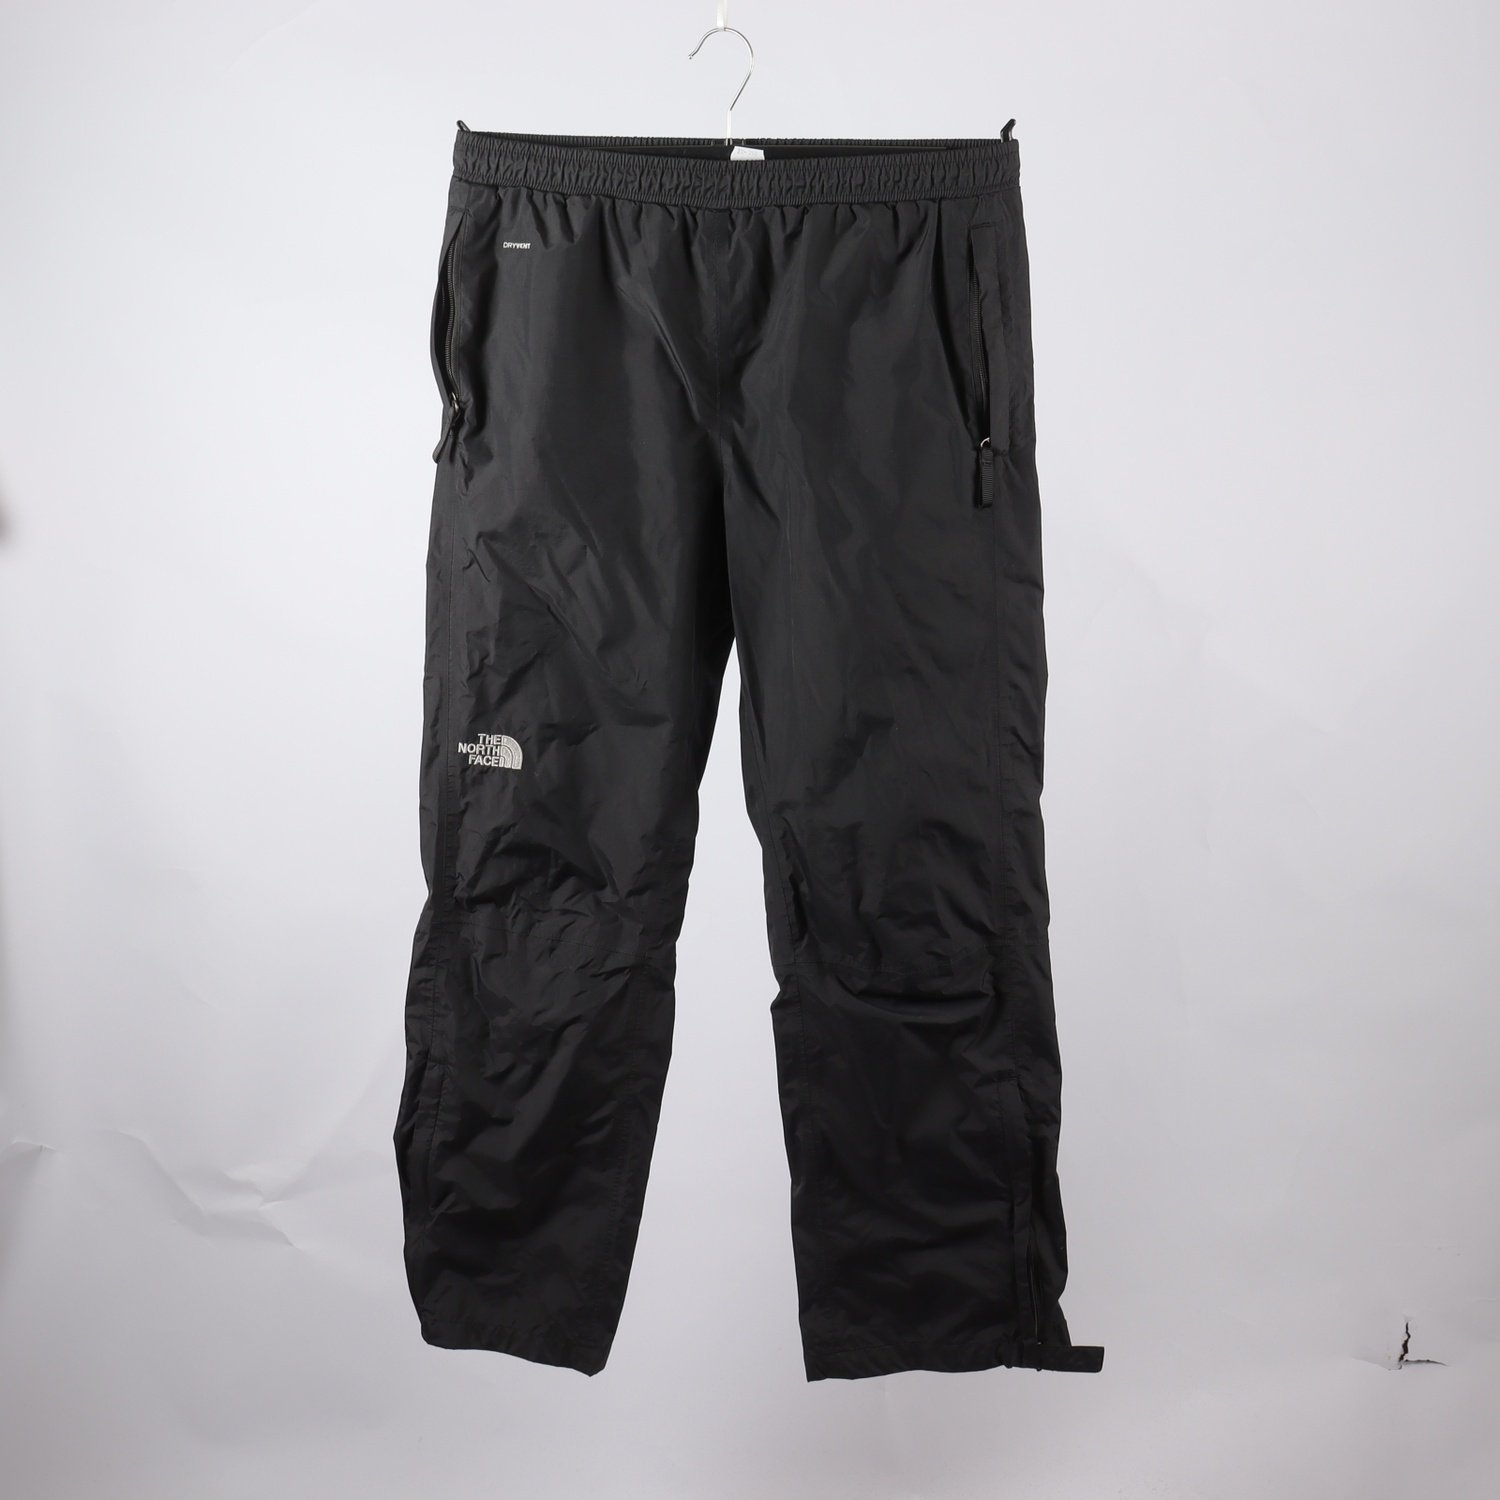 Byxa, The north face, stl M